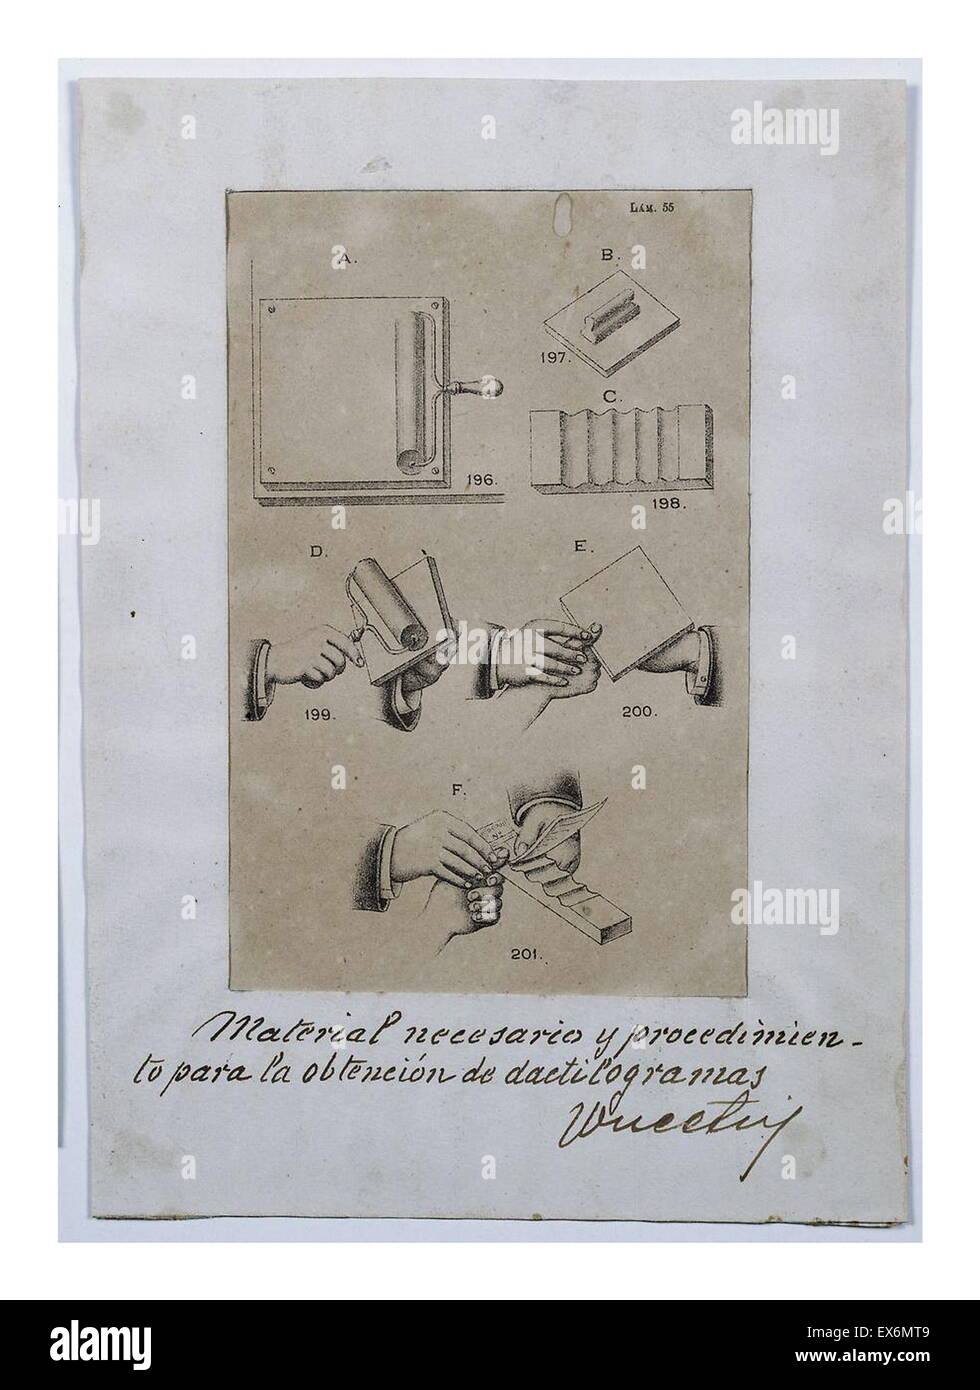 Fingerprinting instructions, about 1900 Vucetich wrote out his original instructions for taking fingerprints, including explanatory diagrams Stock Photo